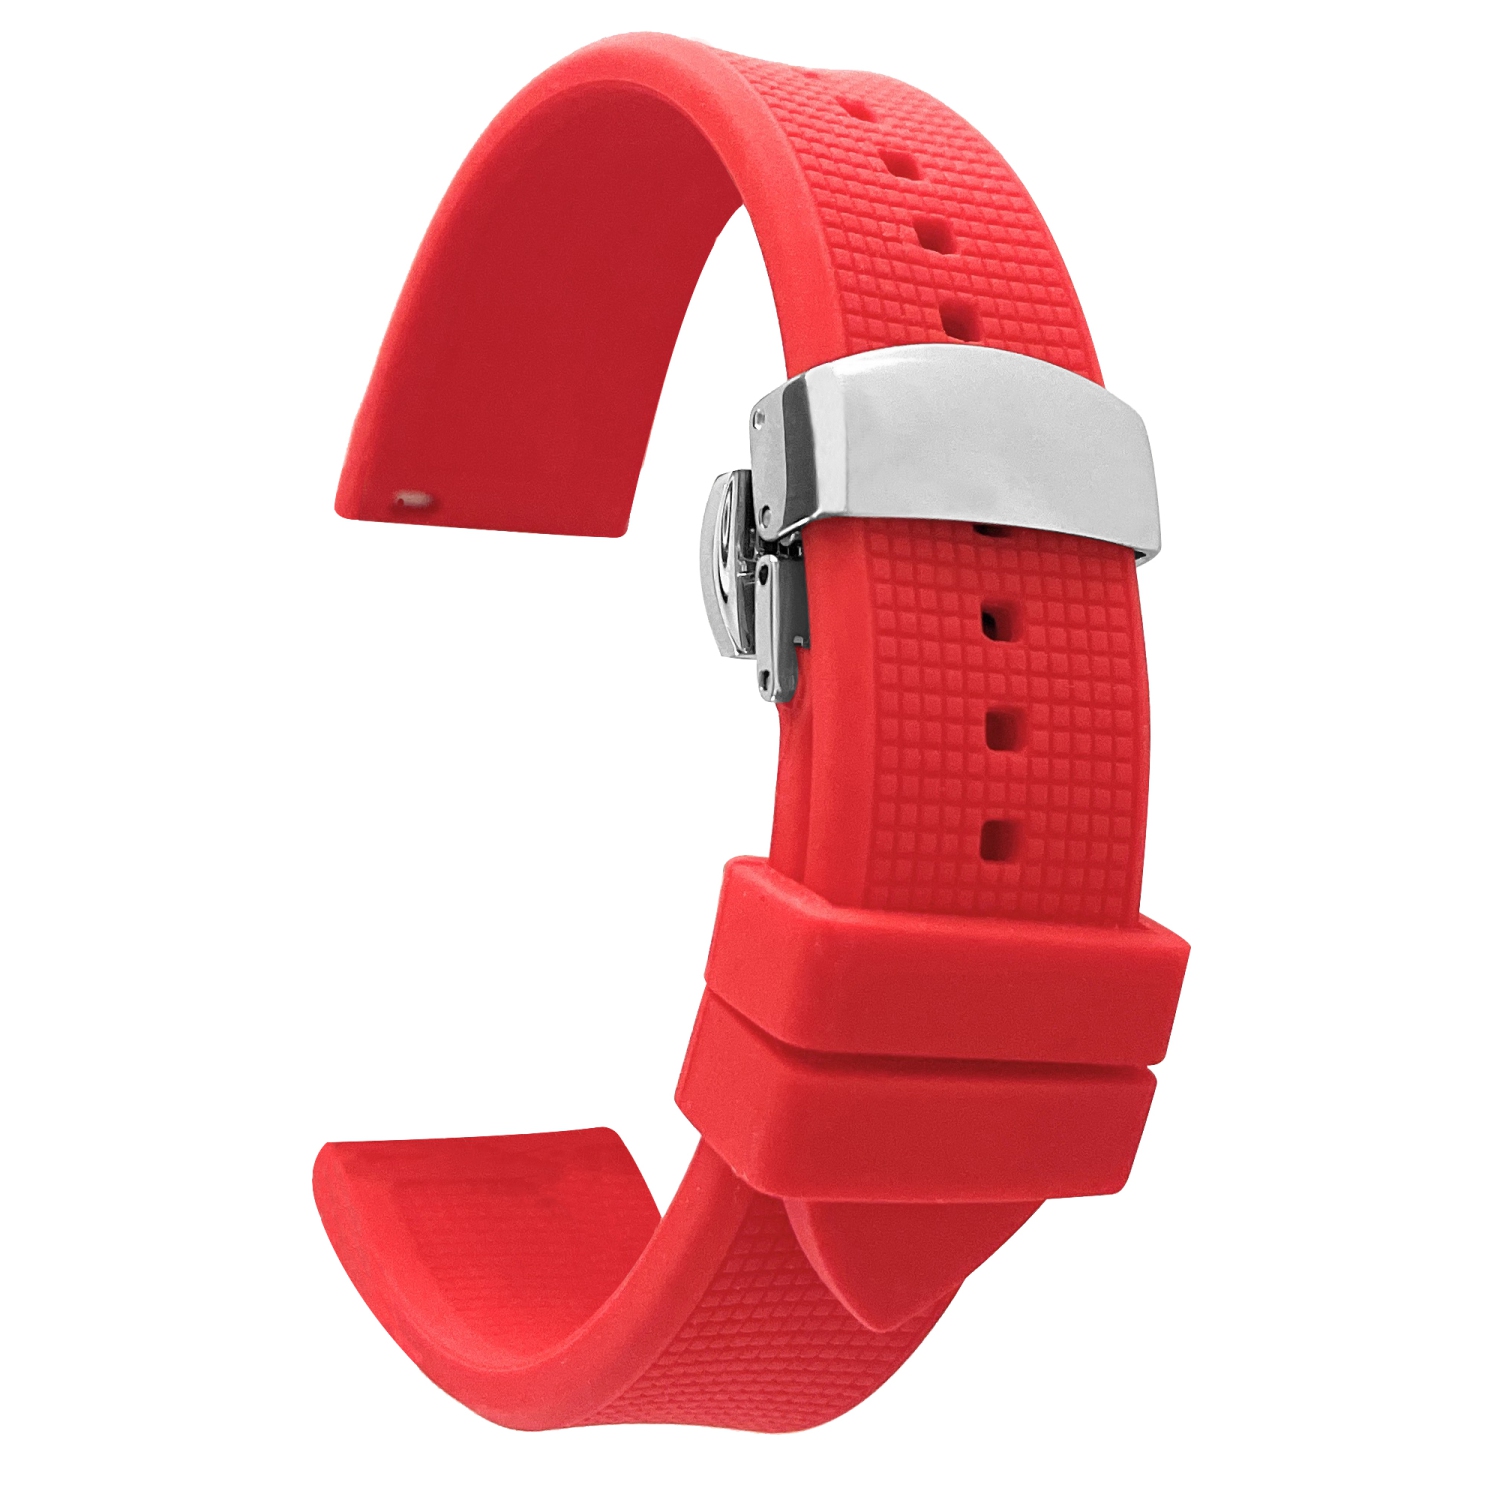 Bandini Waterproof Soft Rubber Silicone Deployment Smart Watch Band Strap For Mobvoi Ticwatch E2, S2, Pro, Pro 3 - 22mm, Red